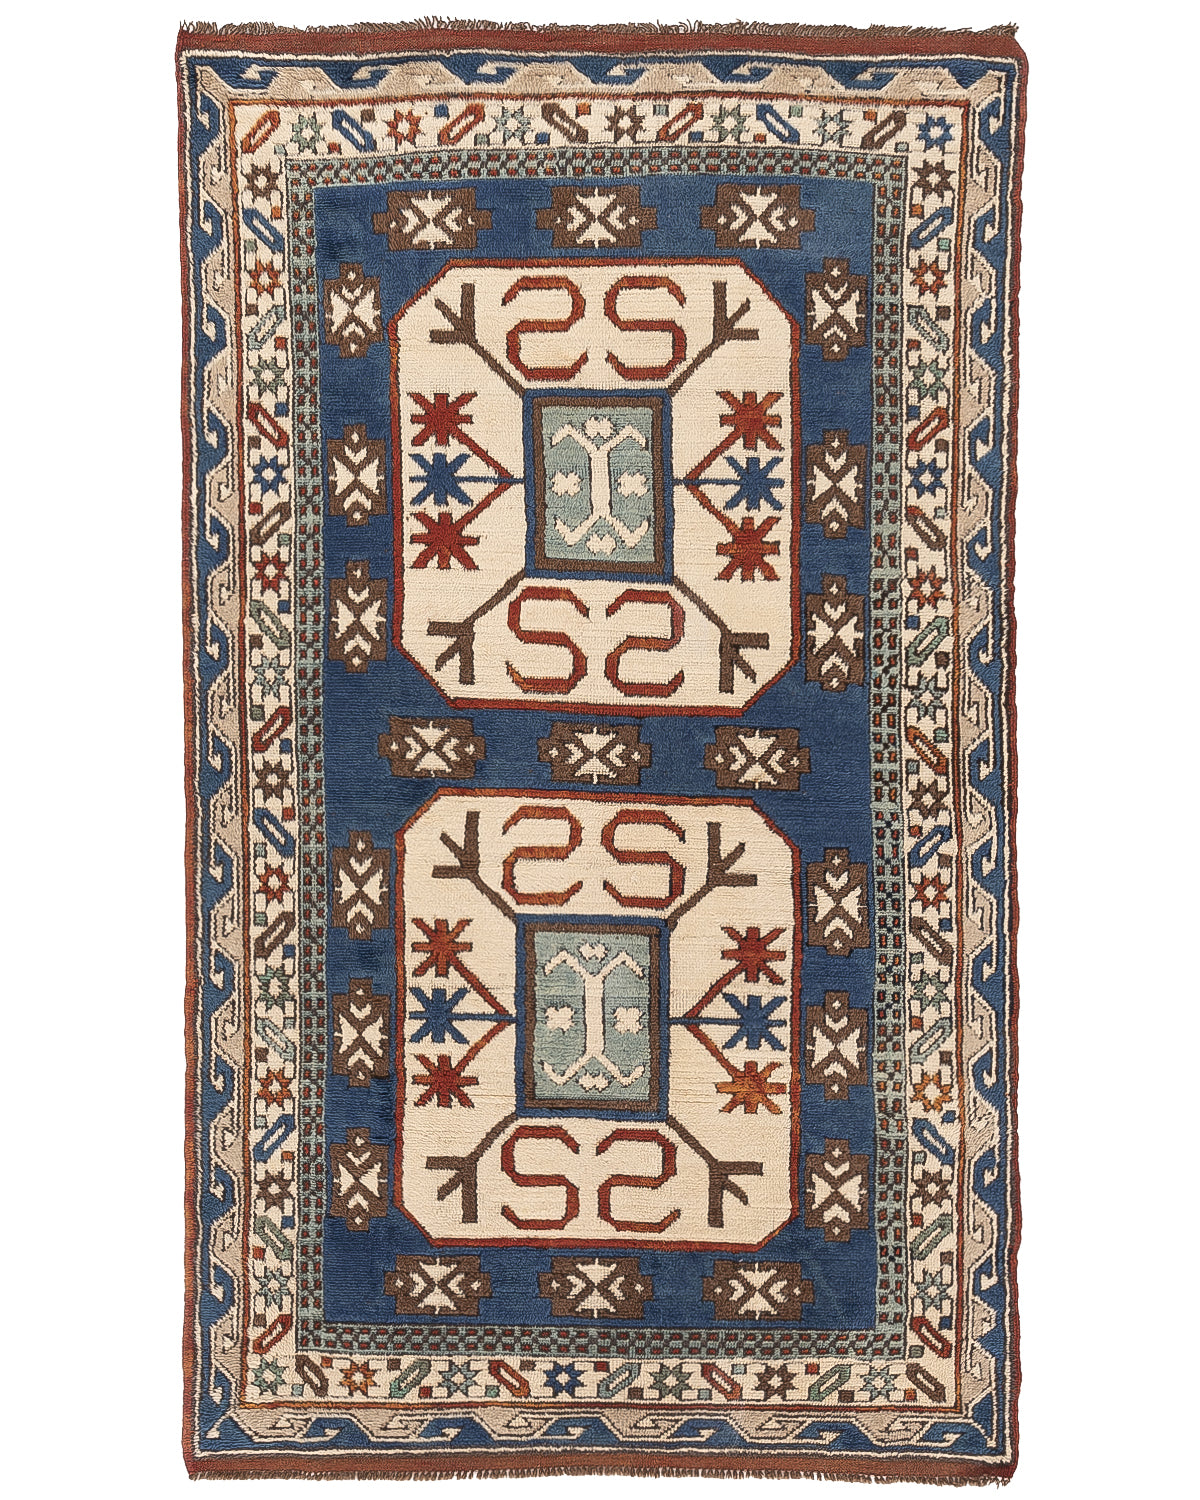 Oriental Rug Anatolian Hand Knotted Wool On Wool 128 X 220 Cm - 4' 3'' X 7' 3'' Navy Blue C012 ER12